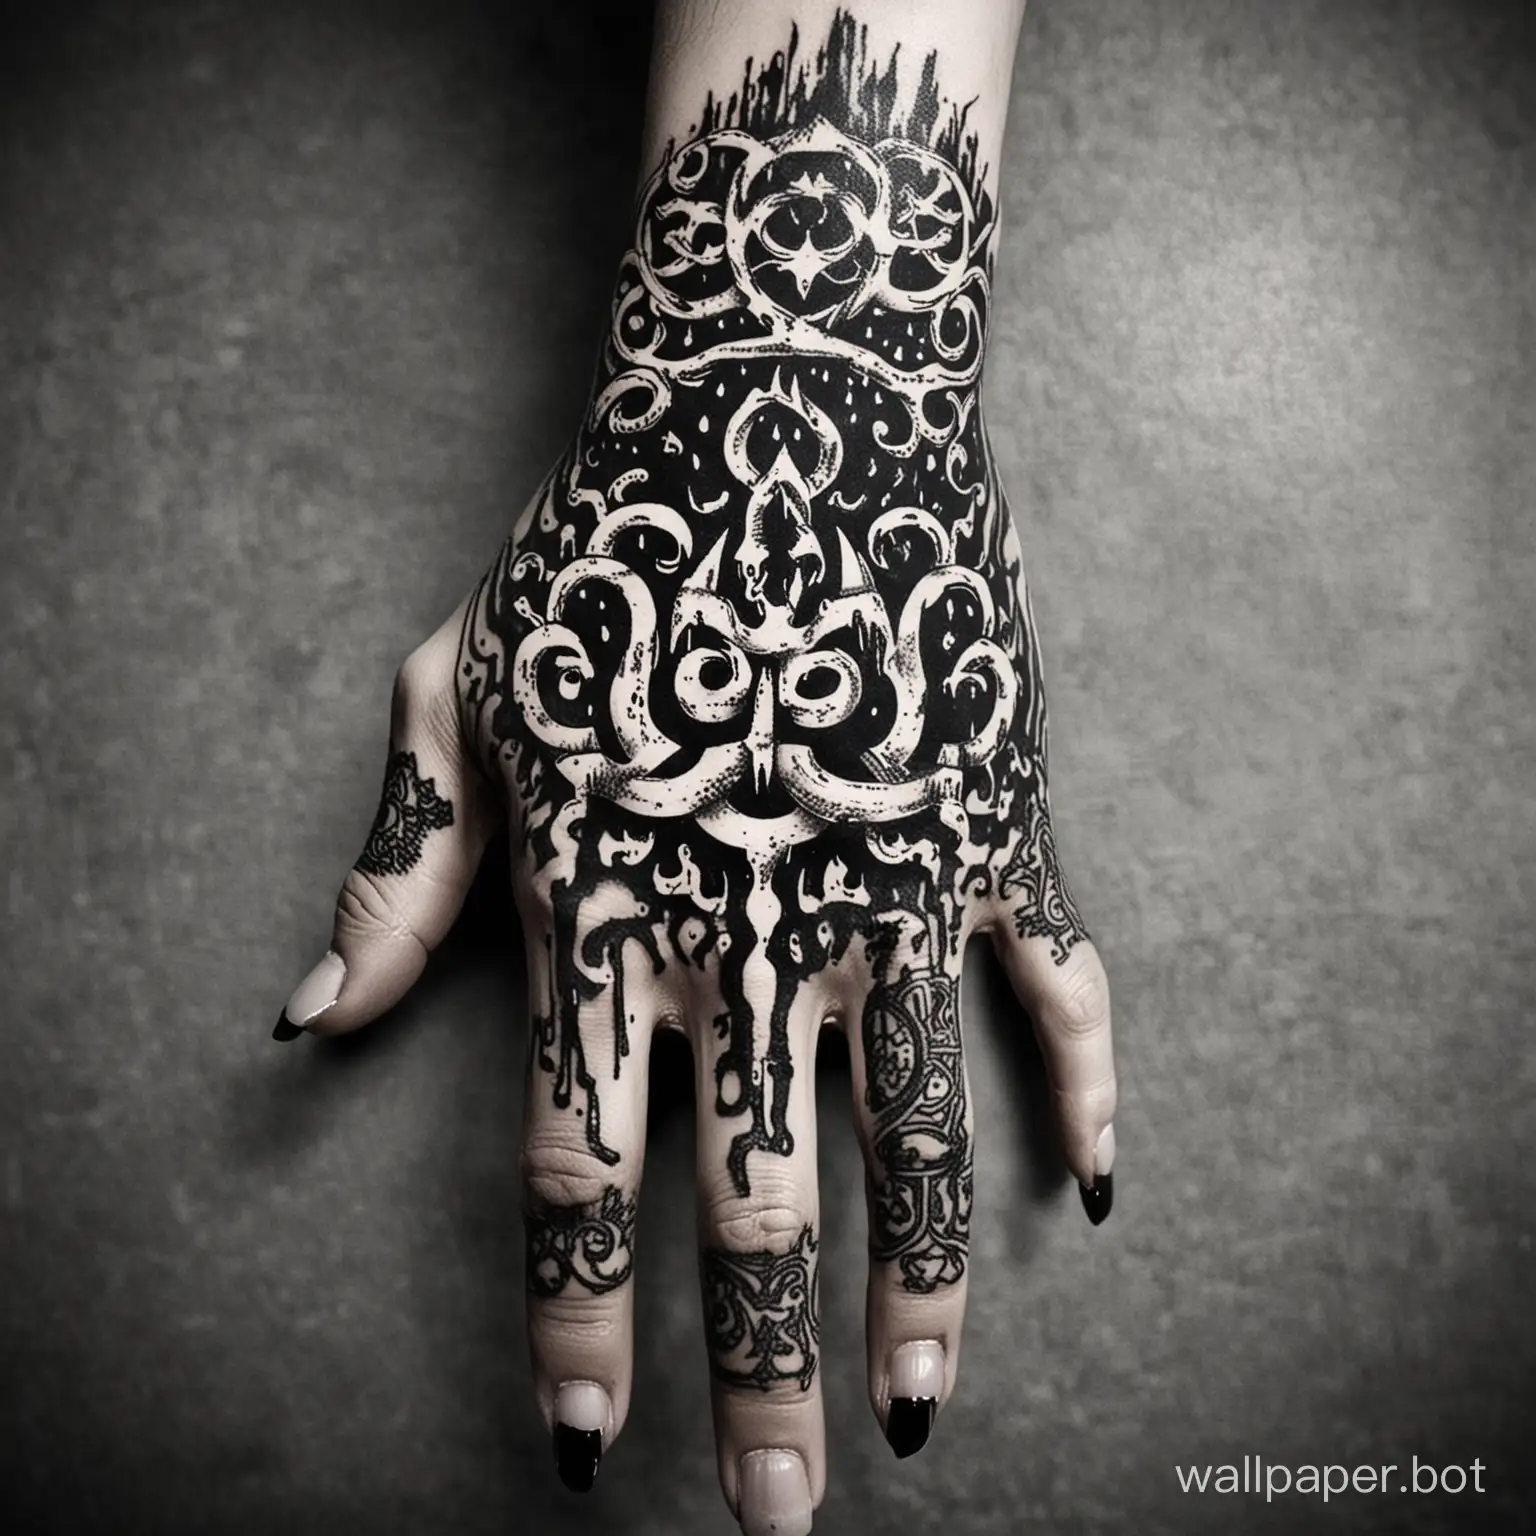 Chaotic-White-Aum-Tattoo-Hand-Design-with-Dark-Tentacles-Background